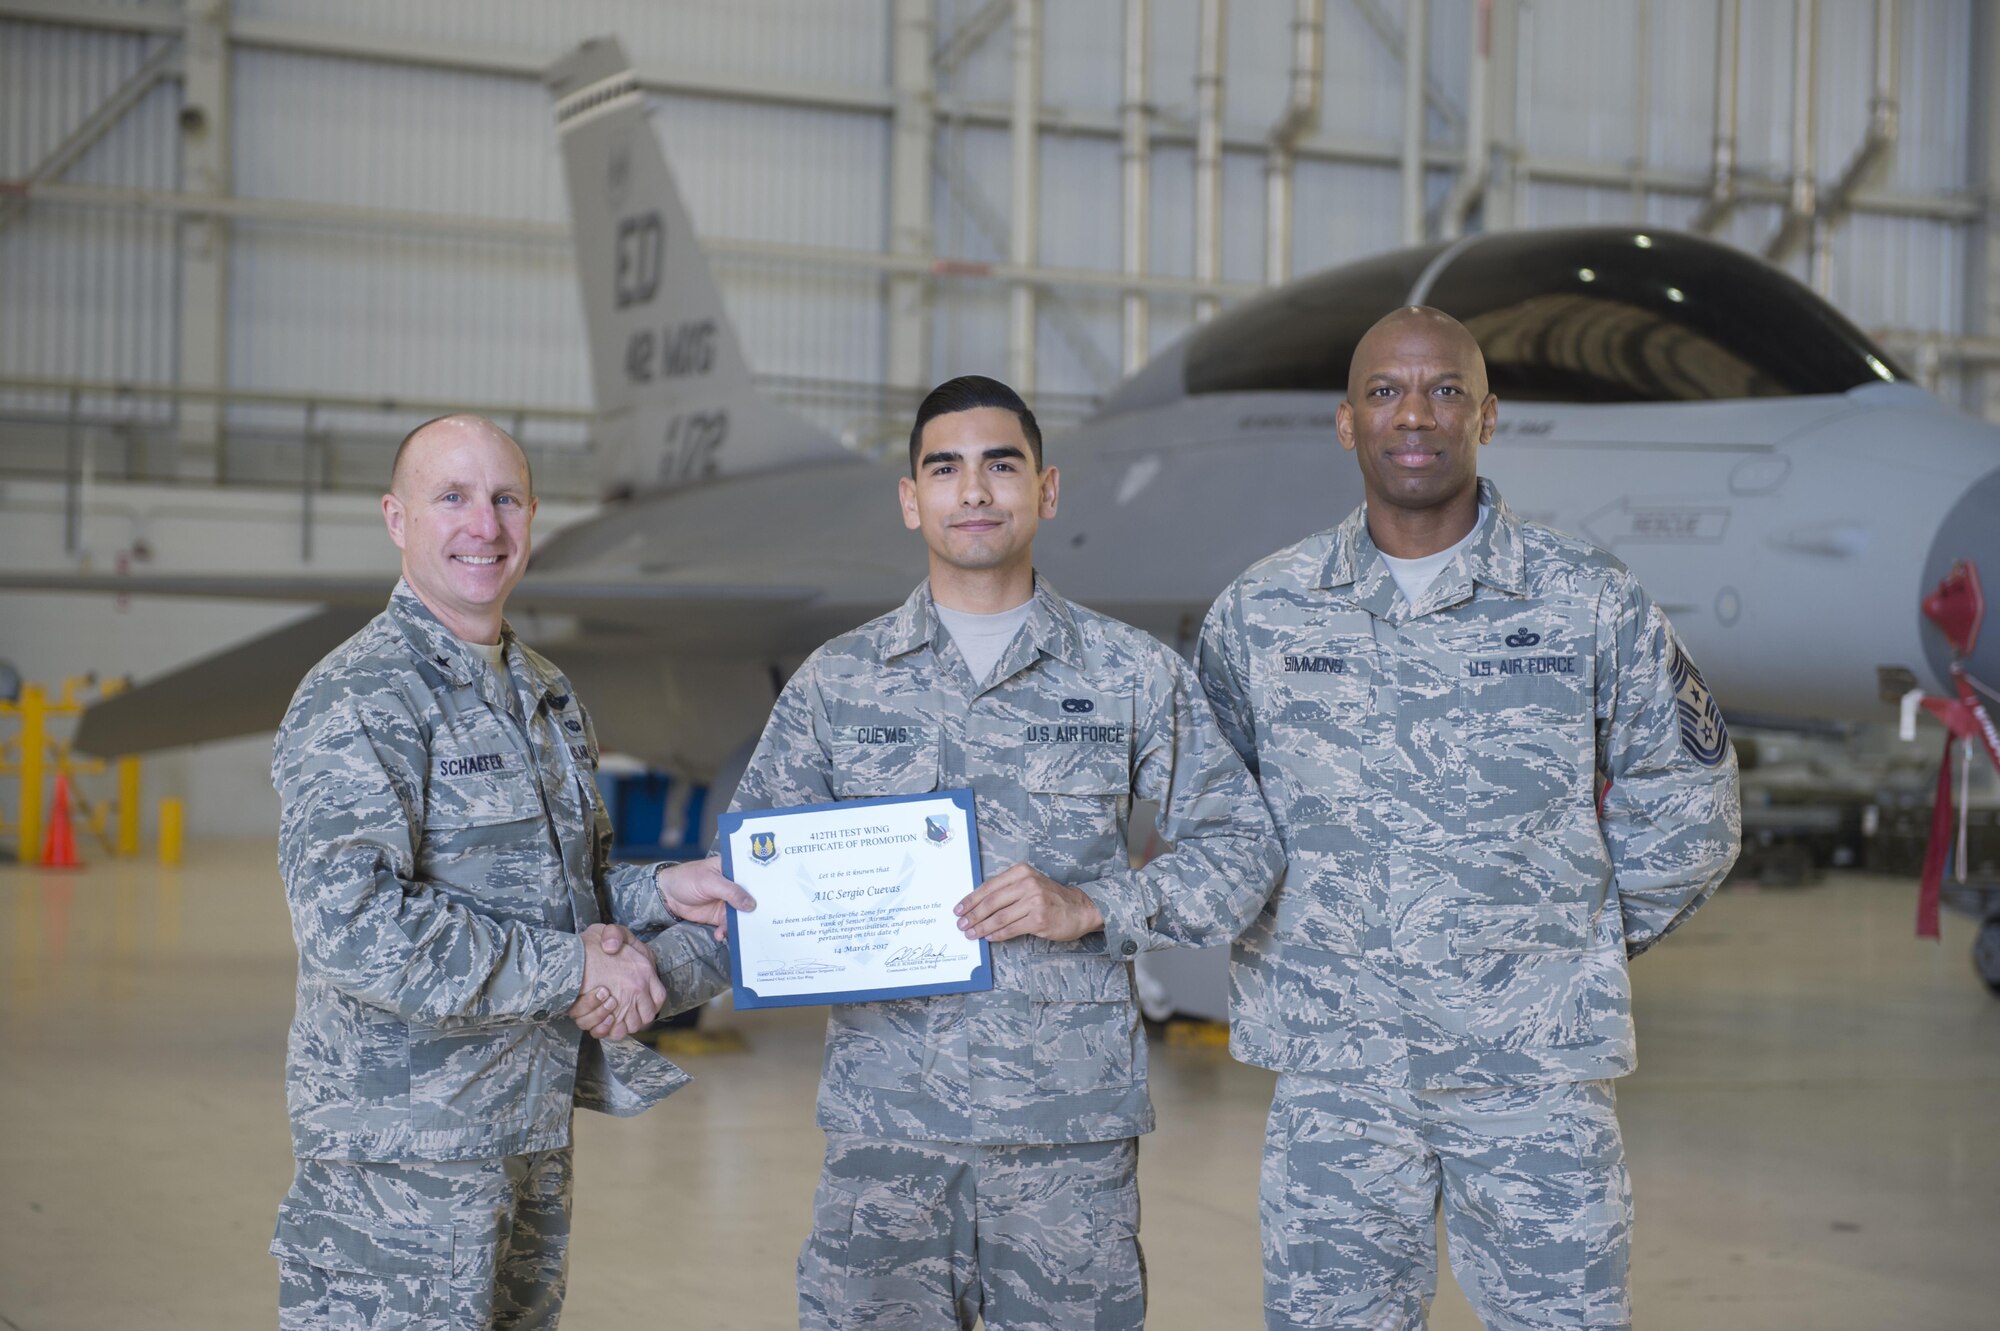 From left: Brig. Gen. Carl Schaefer, 412th Test Wing commander, presented Airman 1st Class Sergio Cuevas, 412th Maintenance Squadron, with a below-the-zone promotion March 16 along with Chief Master Sgt. Todd Simmons, 412th TW command chief. (U.S. Air Force photo by Kyle Larson)